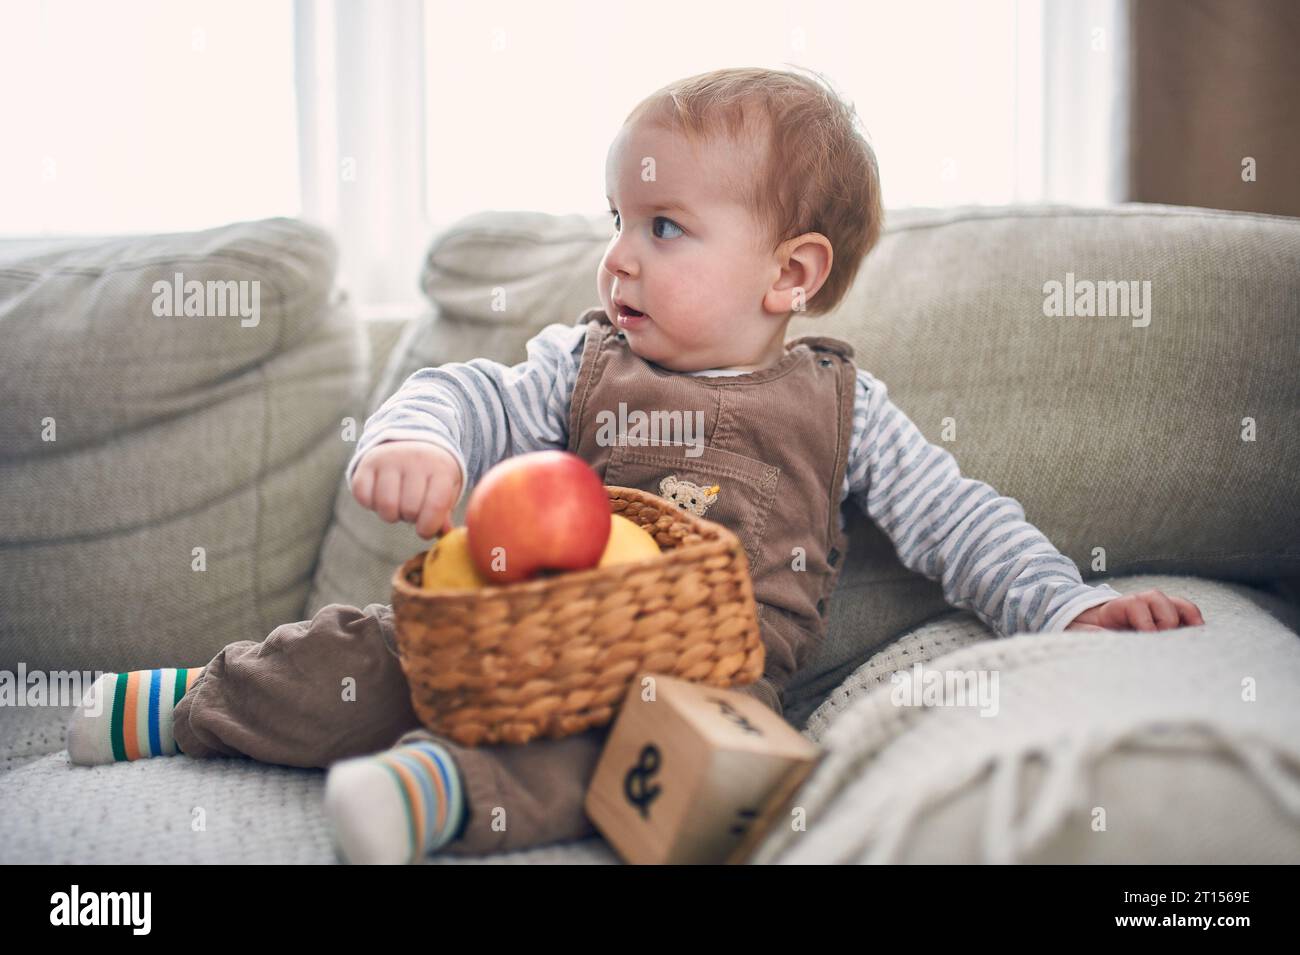 Portrait of a cute 1 year old baby boy sitting on a sofa. Stock Photo